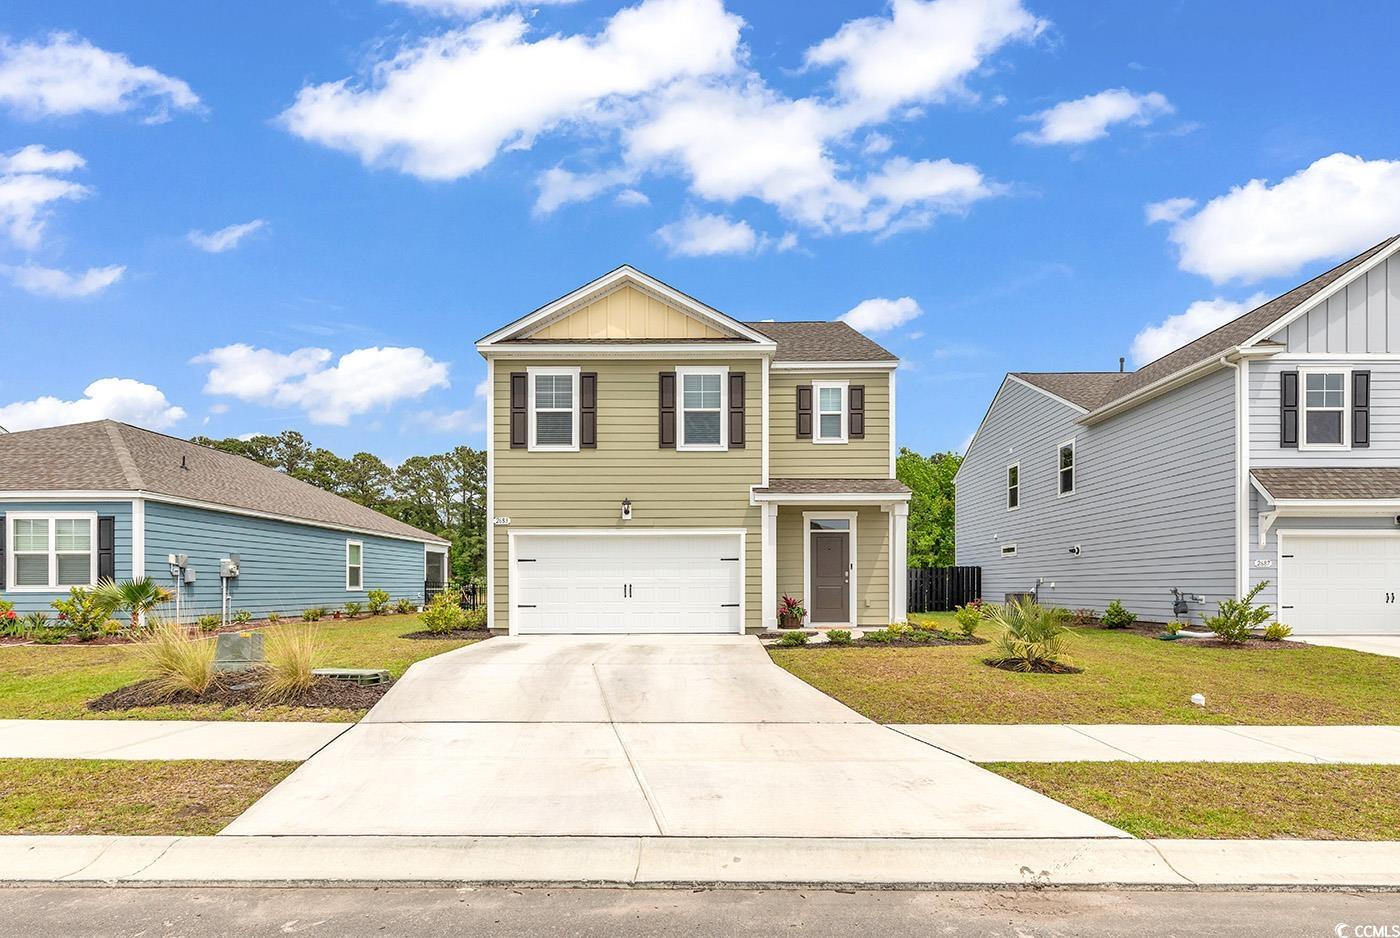 JUST LISTED and OPEN HOUSE! 2683 Pegasus Place Myrtle Beach, SC 29577